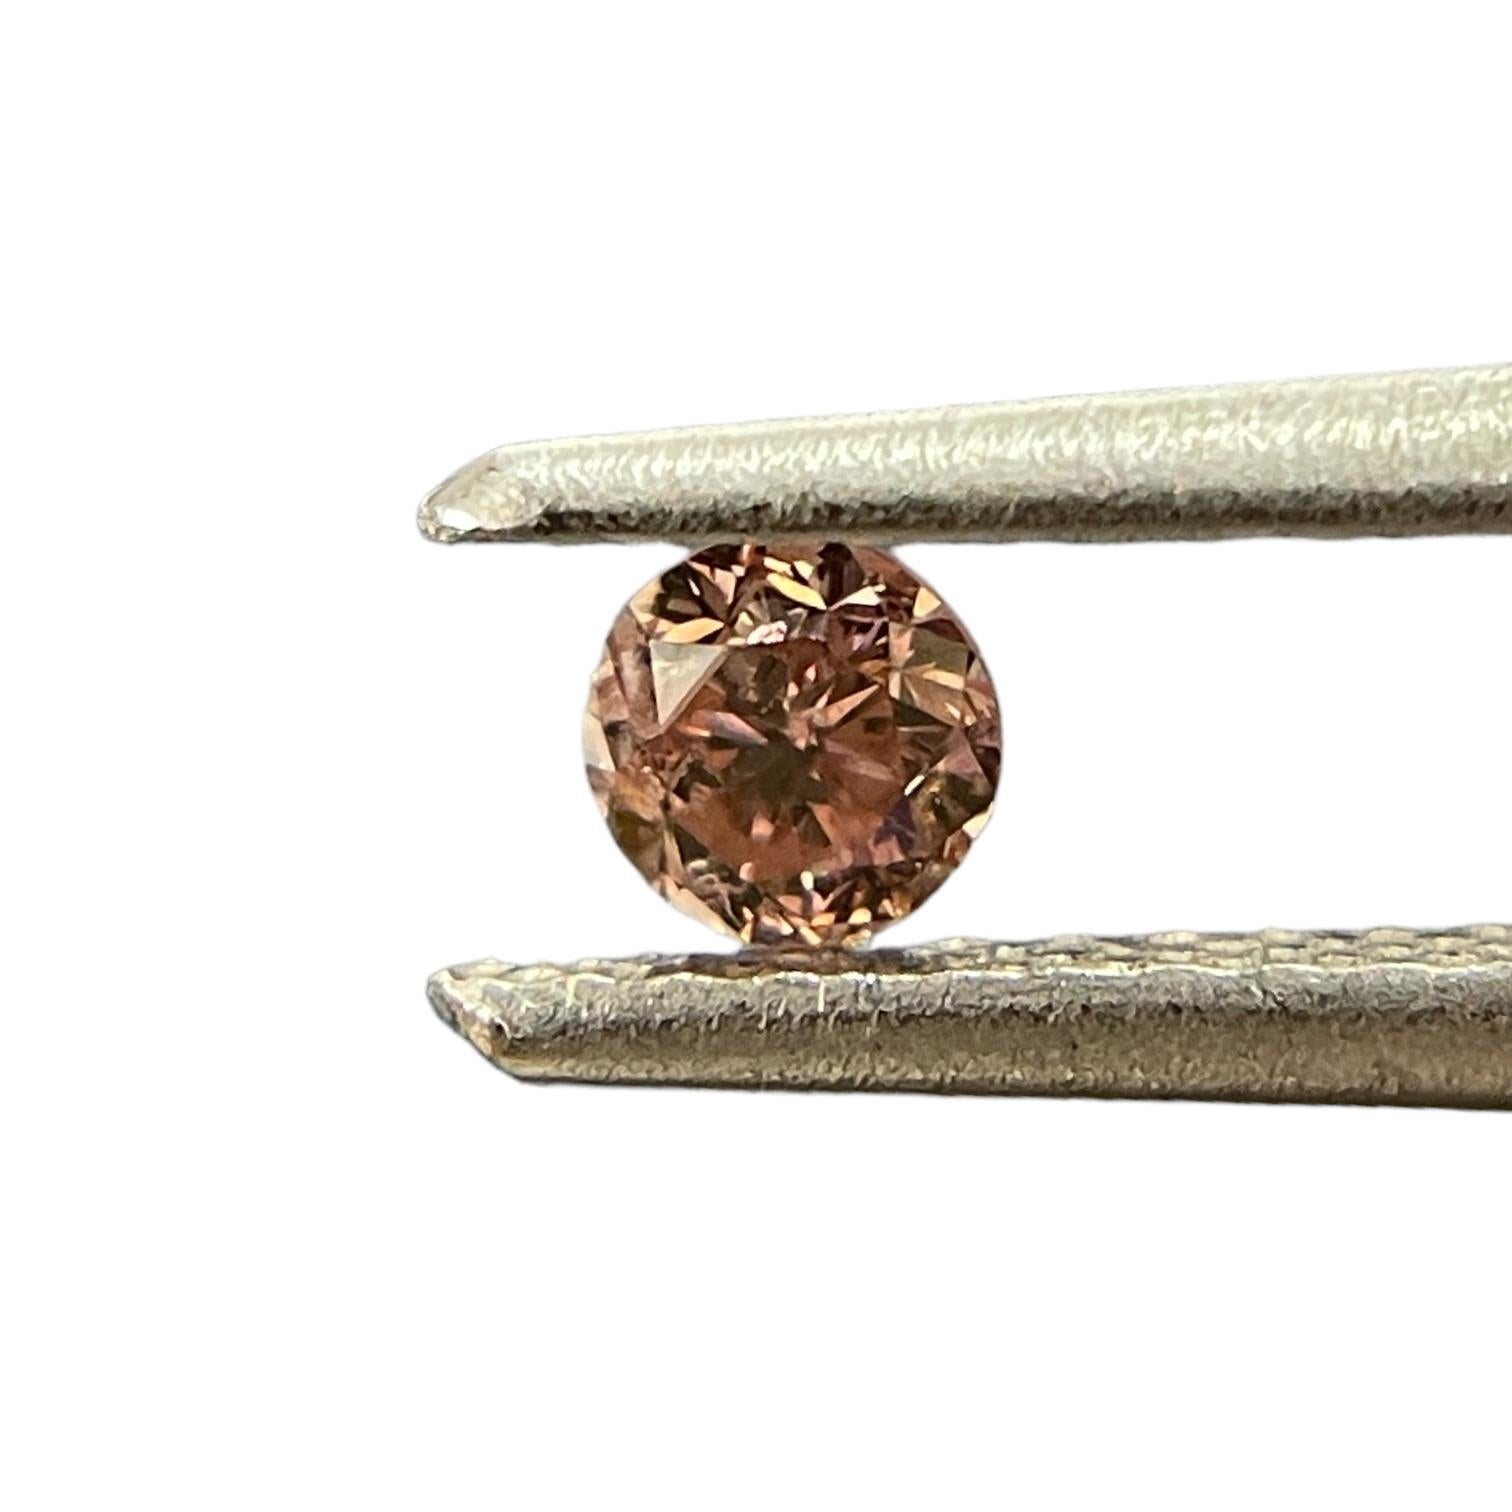 Modern GIA Certified 0.18 TCW Round Fancy Brown-Pink Natural Diamond For Sale